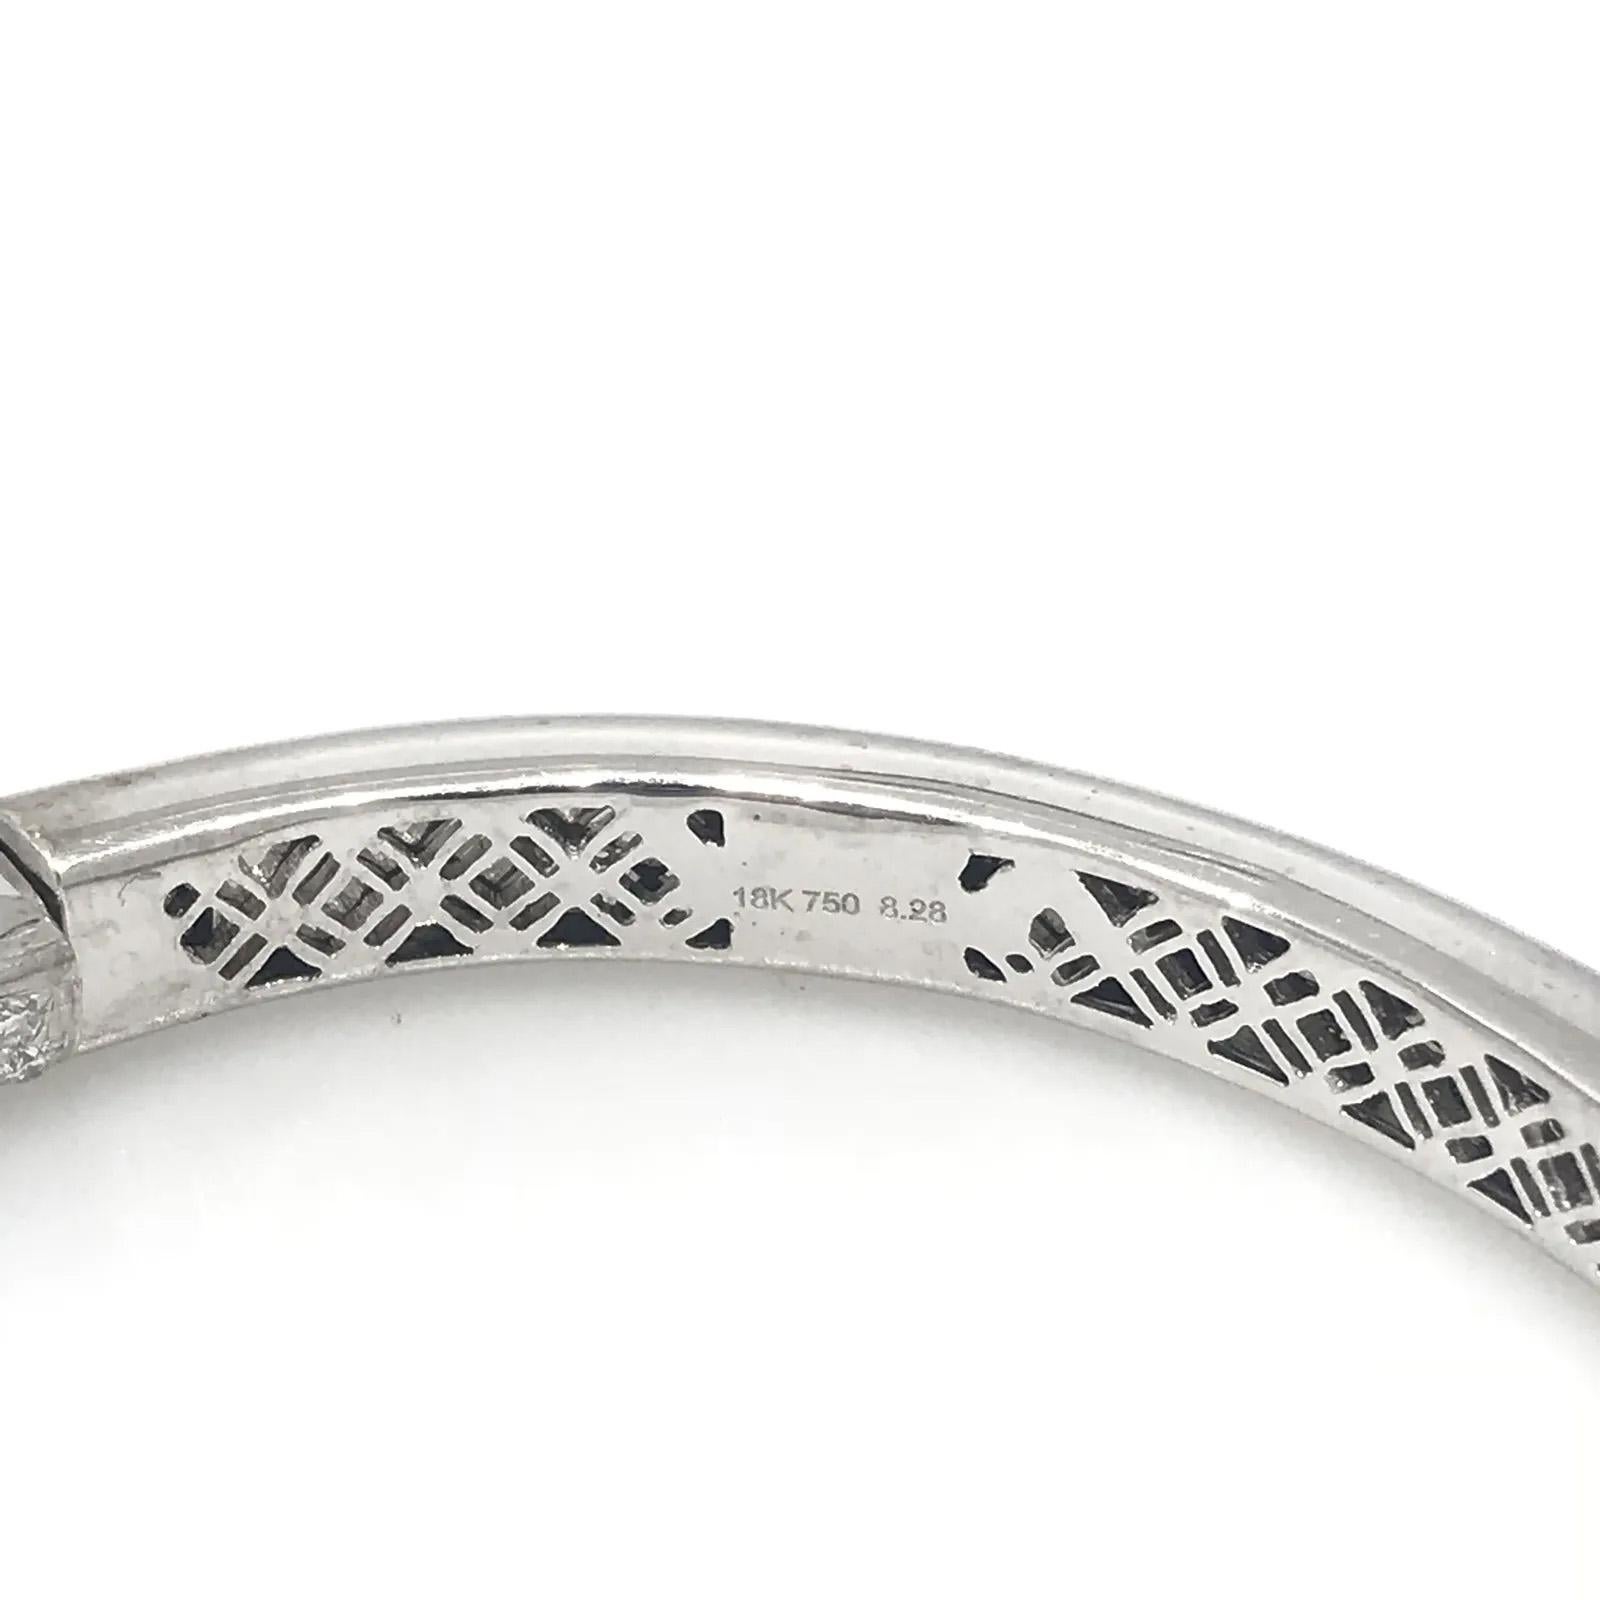 Round Cut Diamond Pave Bangle Bracelet 8.28 Carats Total Weight in 18k White Gold For Sale